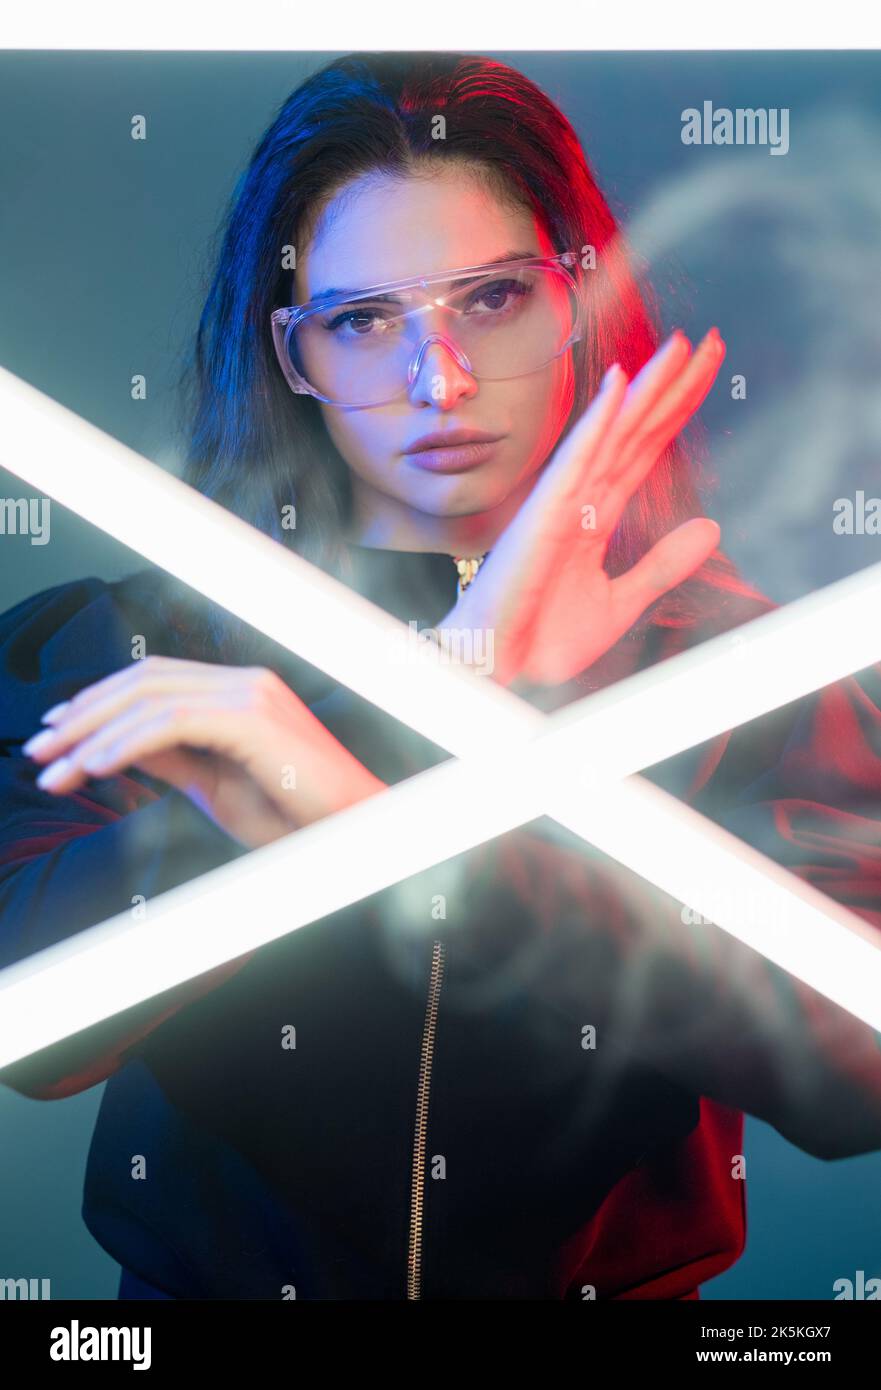 Cyberpunk fighter. Futuristic portrait. Galaxy war. Red neon light brave cyborg woman in glasses performing karate hand move in mist with crossed whit Stock Photo